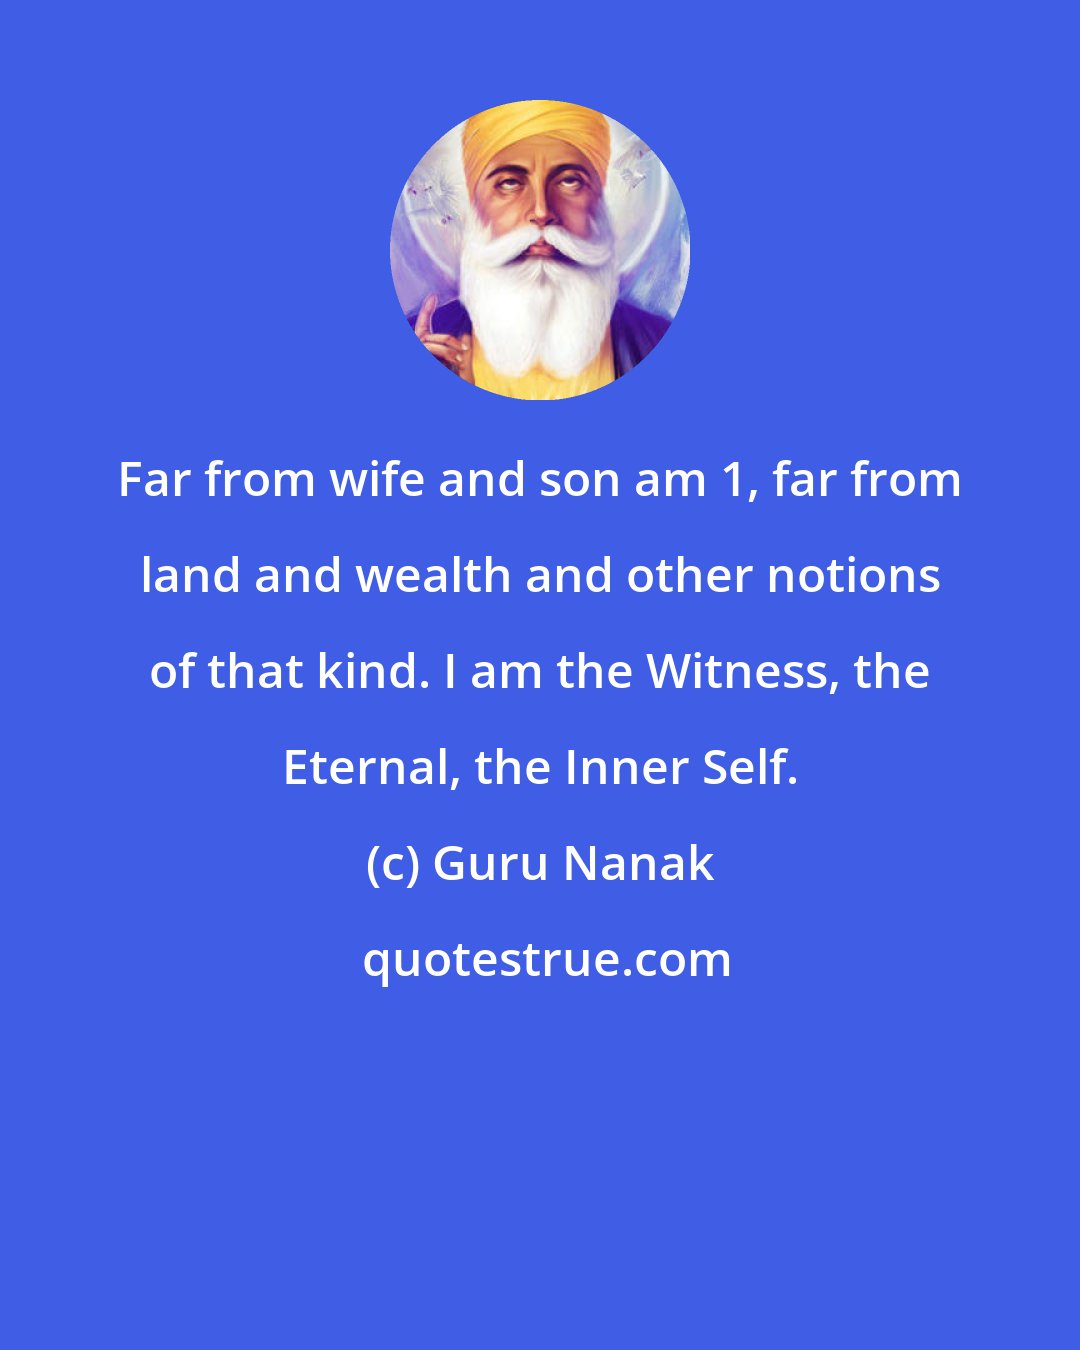 Guru Nanak: Far from wife and son am 1, far from land and wealth and other notions of that kind. I am the Witness, the Eternal, the Inner Self.